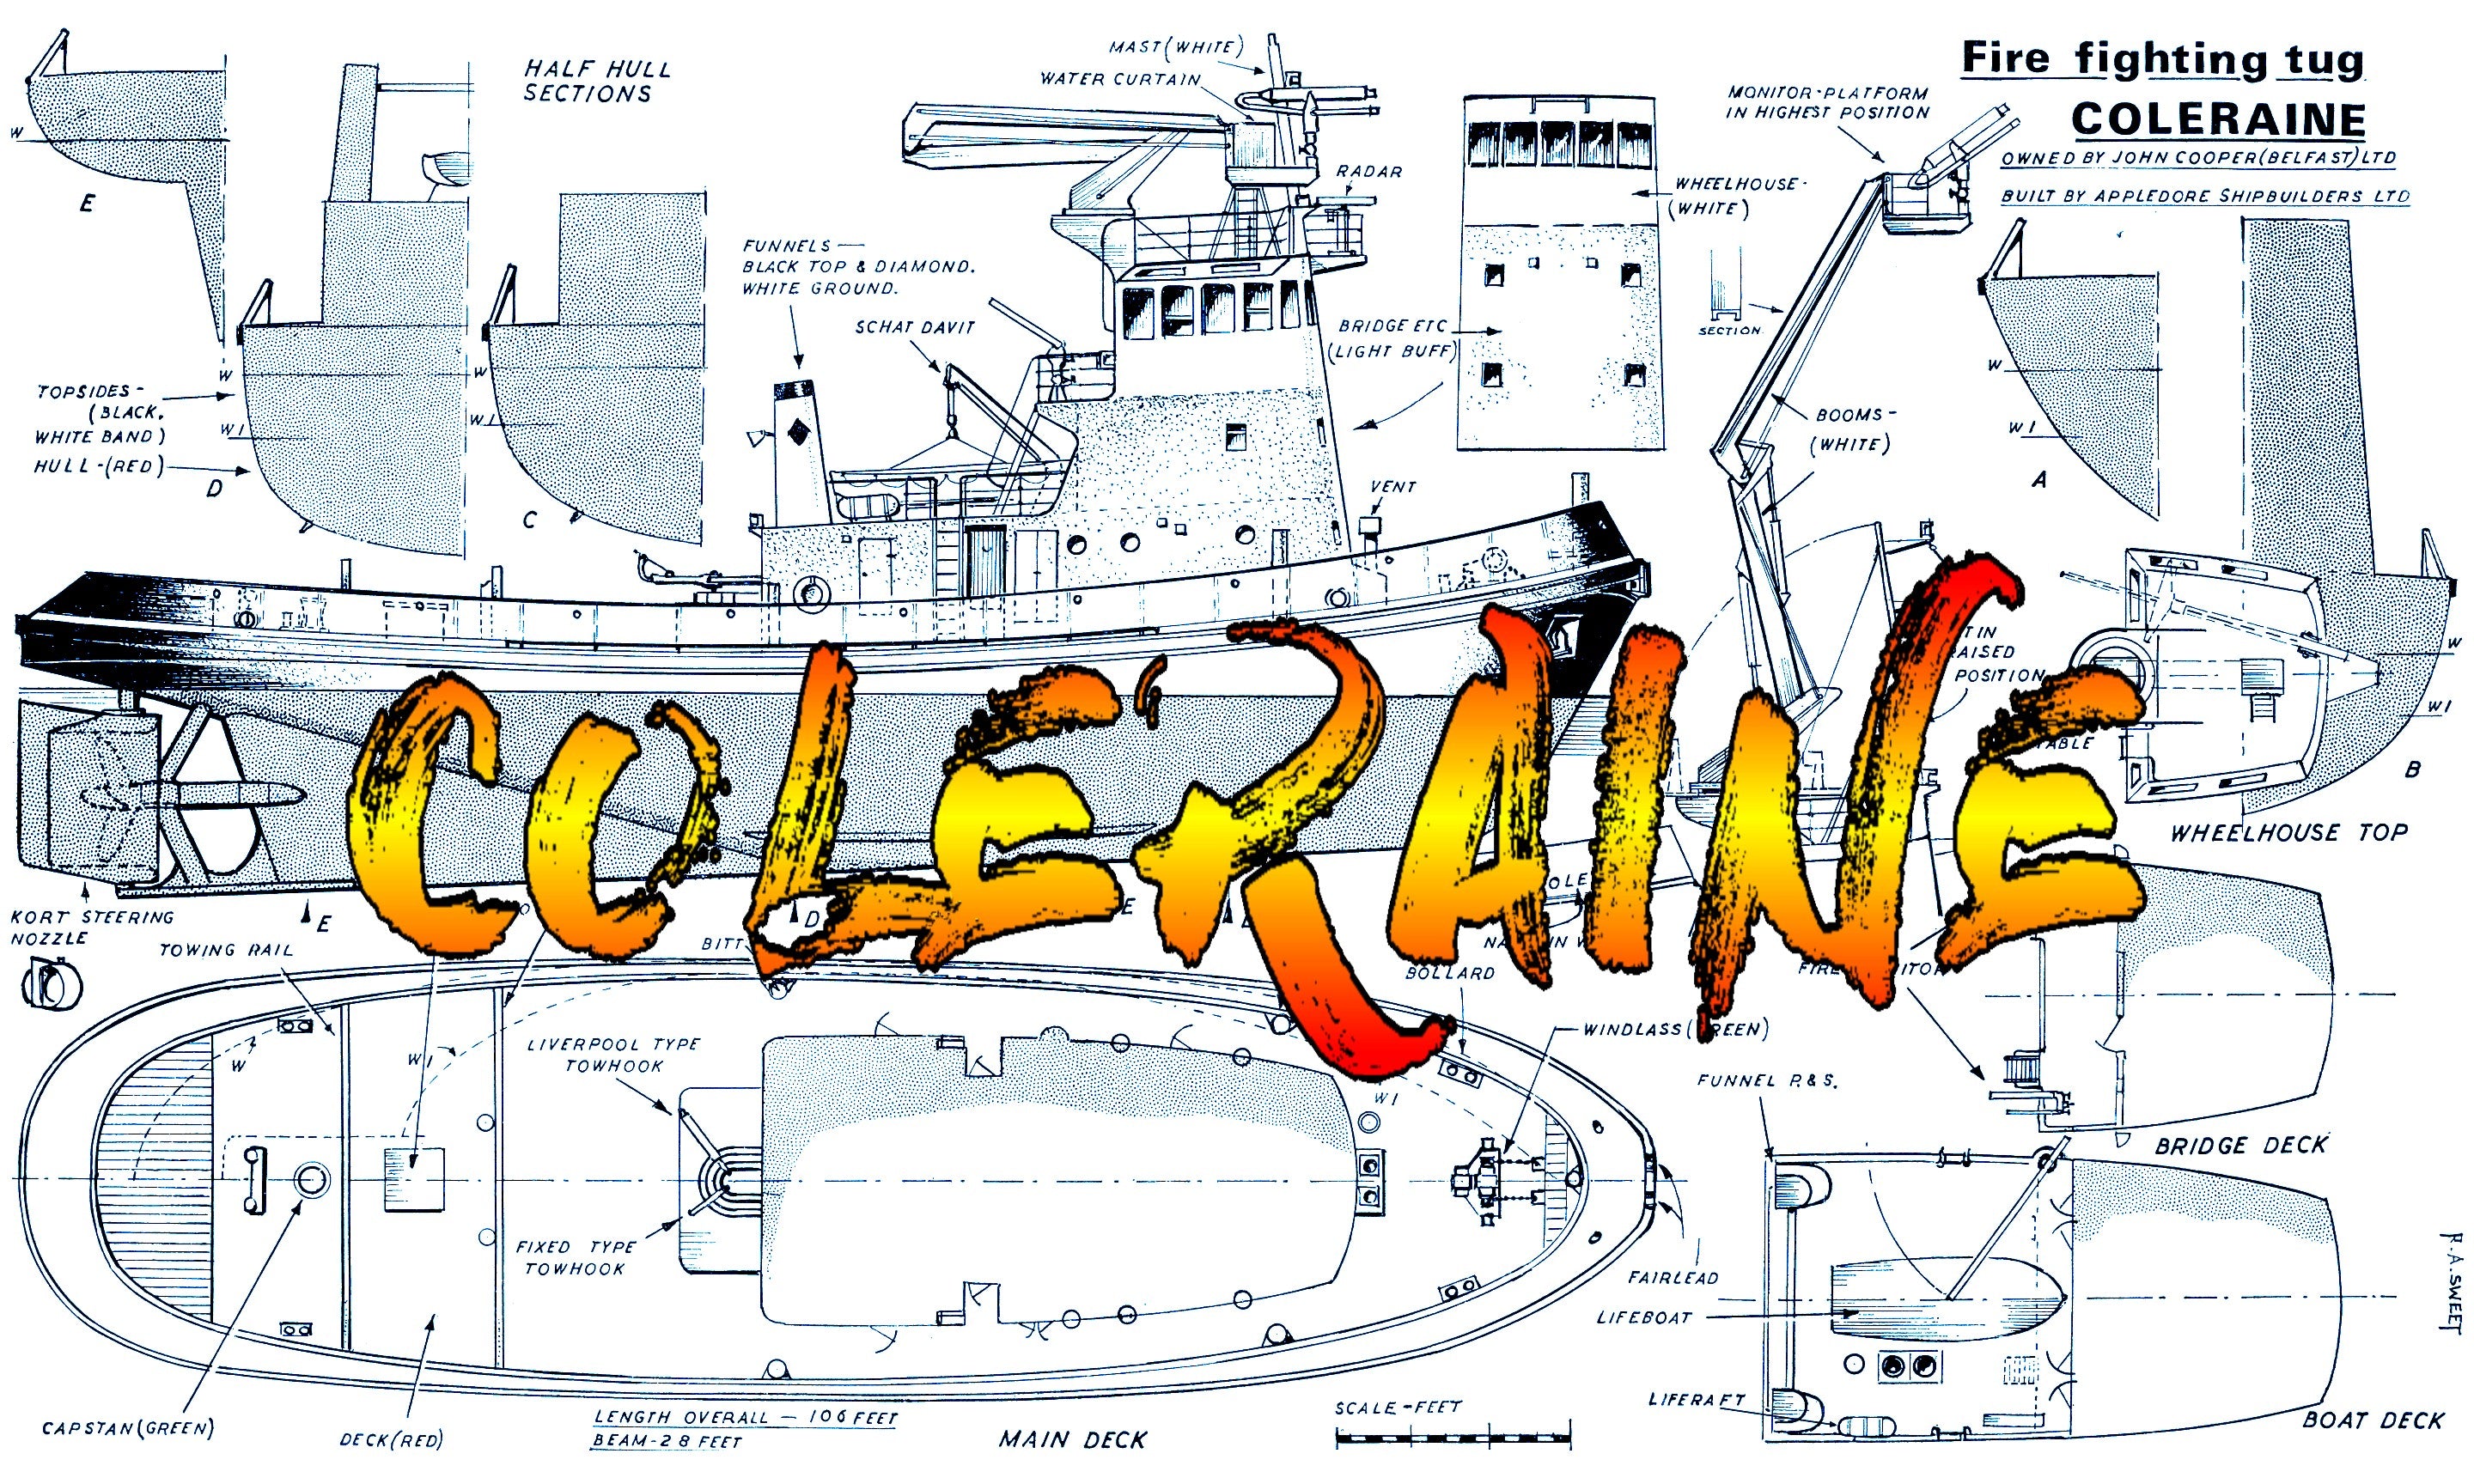 full size printed plans scale 1/48 firefighting tug coleraine suitable for radio control